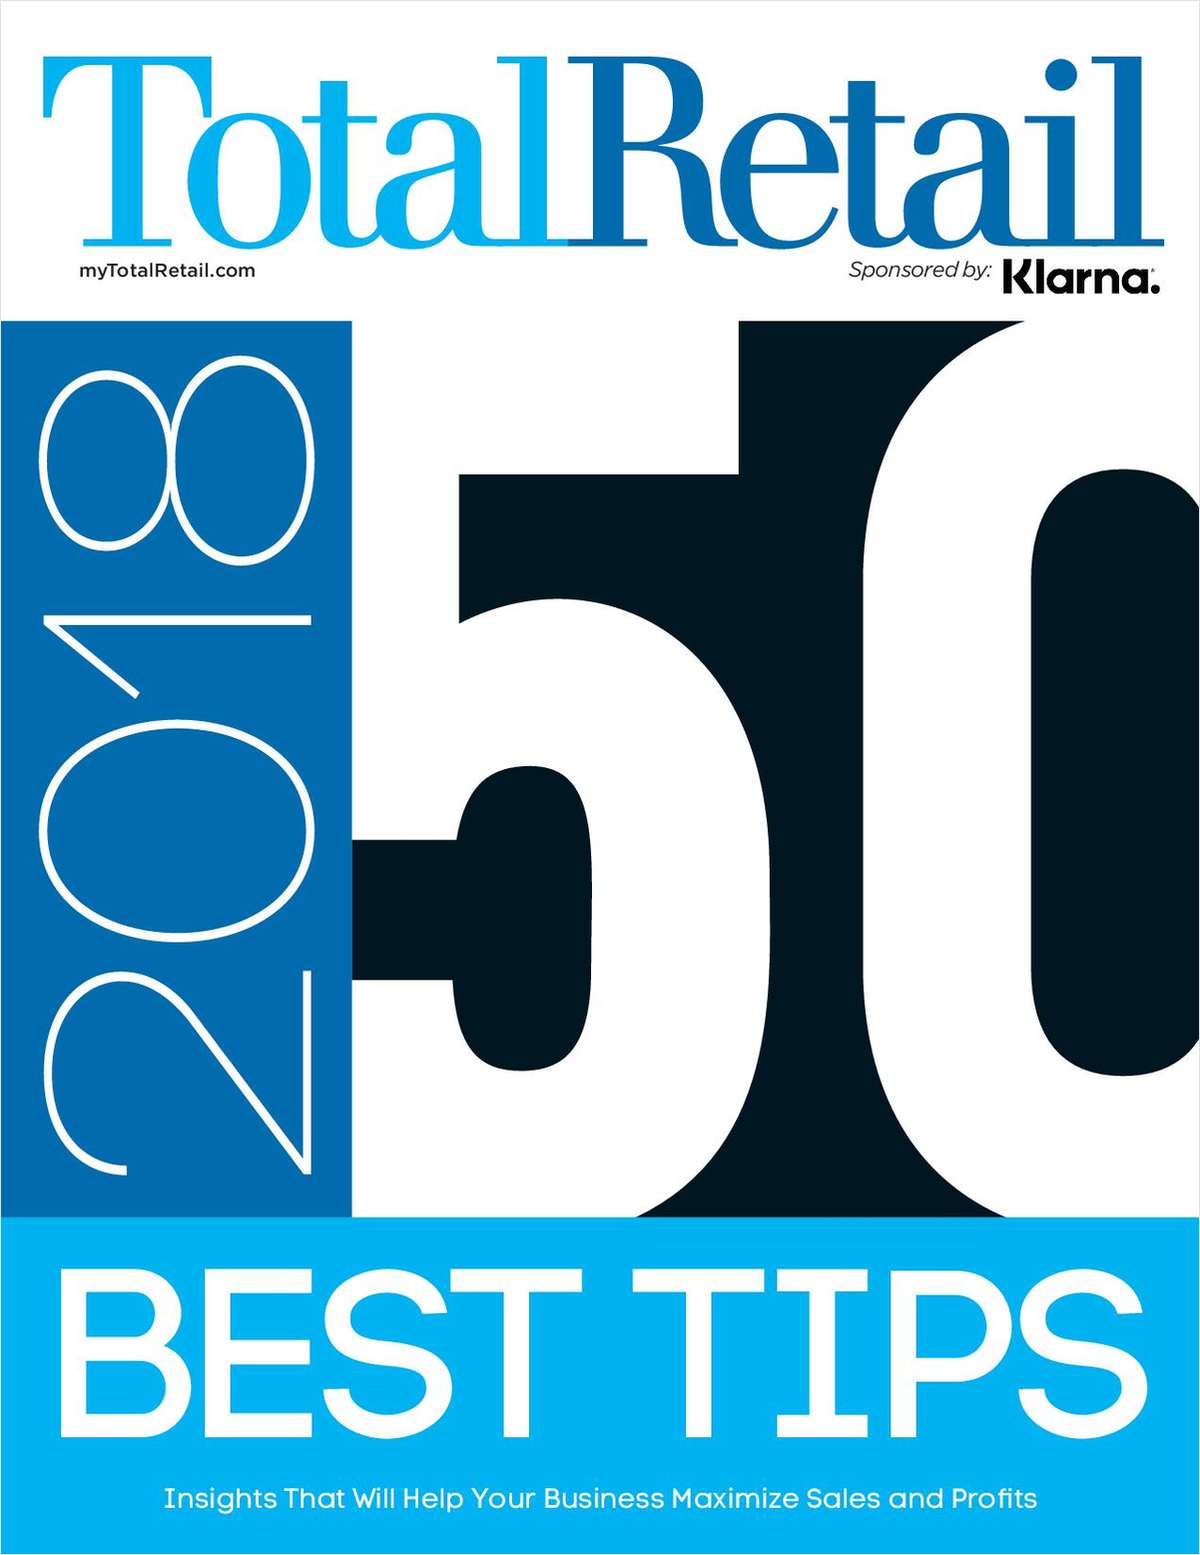 Total Retail's 50 Best Retail Tips of 2018